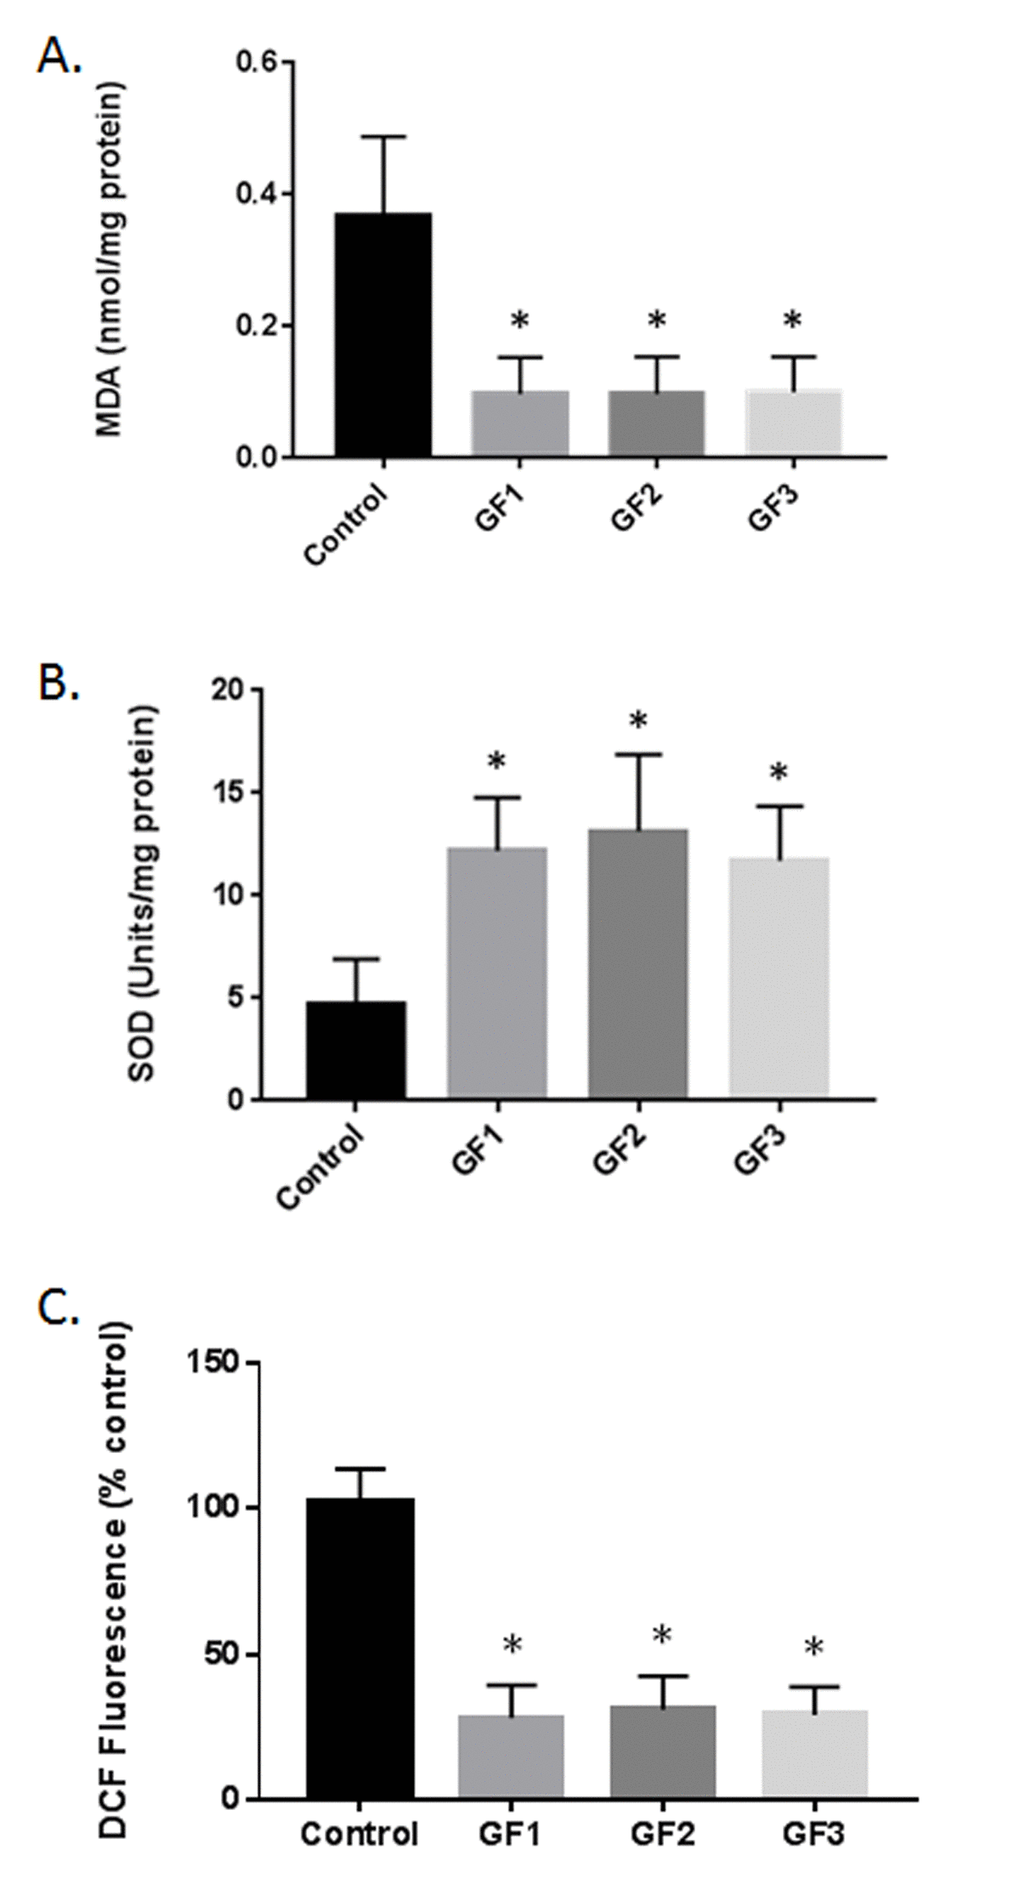 Reduction in oxidative stress following GF diets. (A) MDA levels in the brains of aged rats subjected to control or GF diets. (B) SOD activity in the brains of aged rats following feeding control diets or diets enriched with GF formulas. (C) DCF assay in the brains of aged rats following feeding control diets or diets enriched with GF formulas. N = 20 per group. P